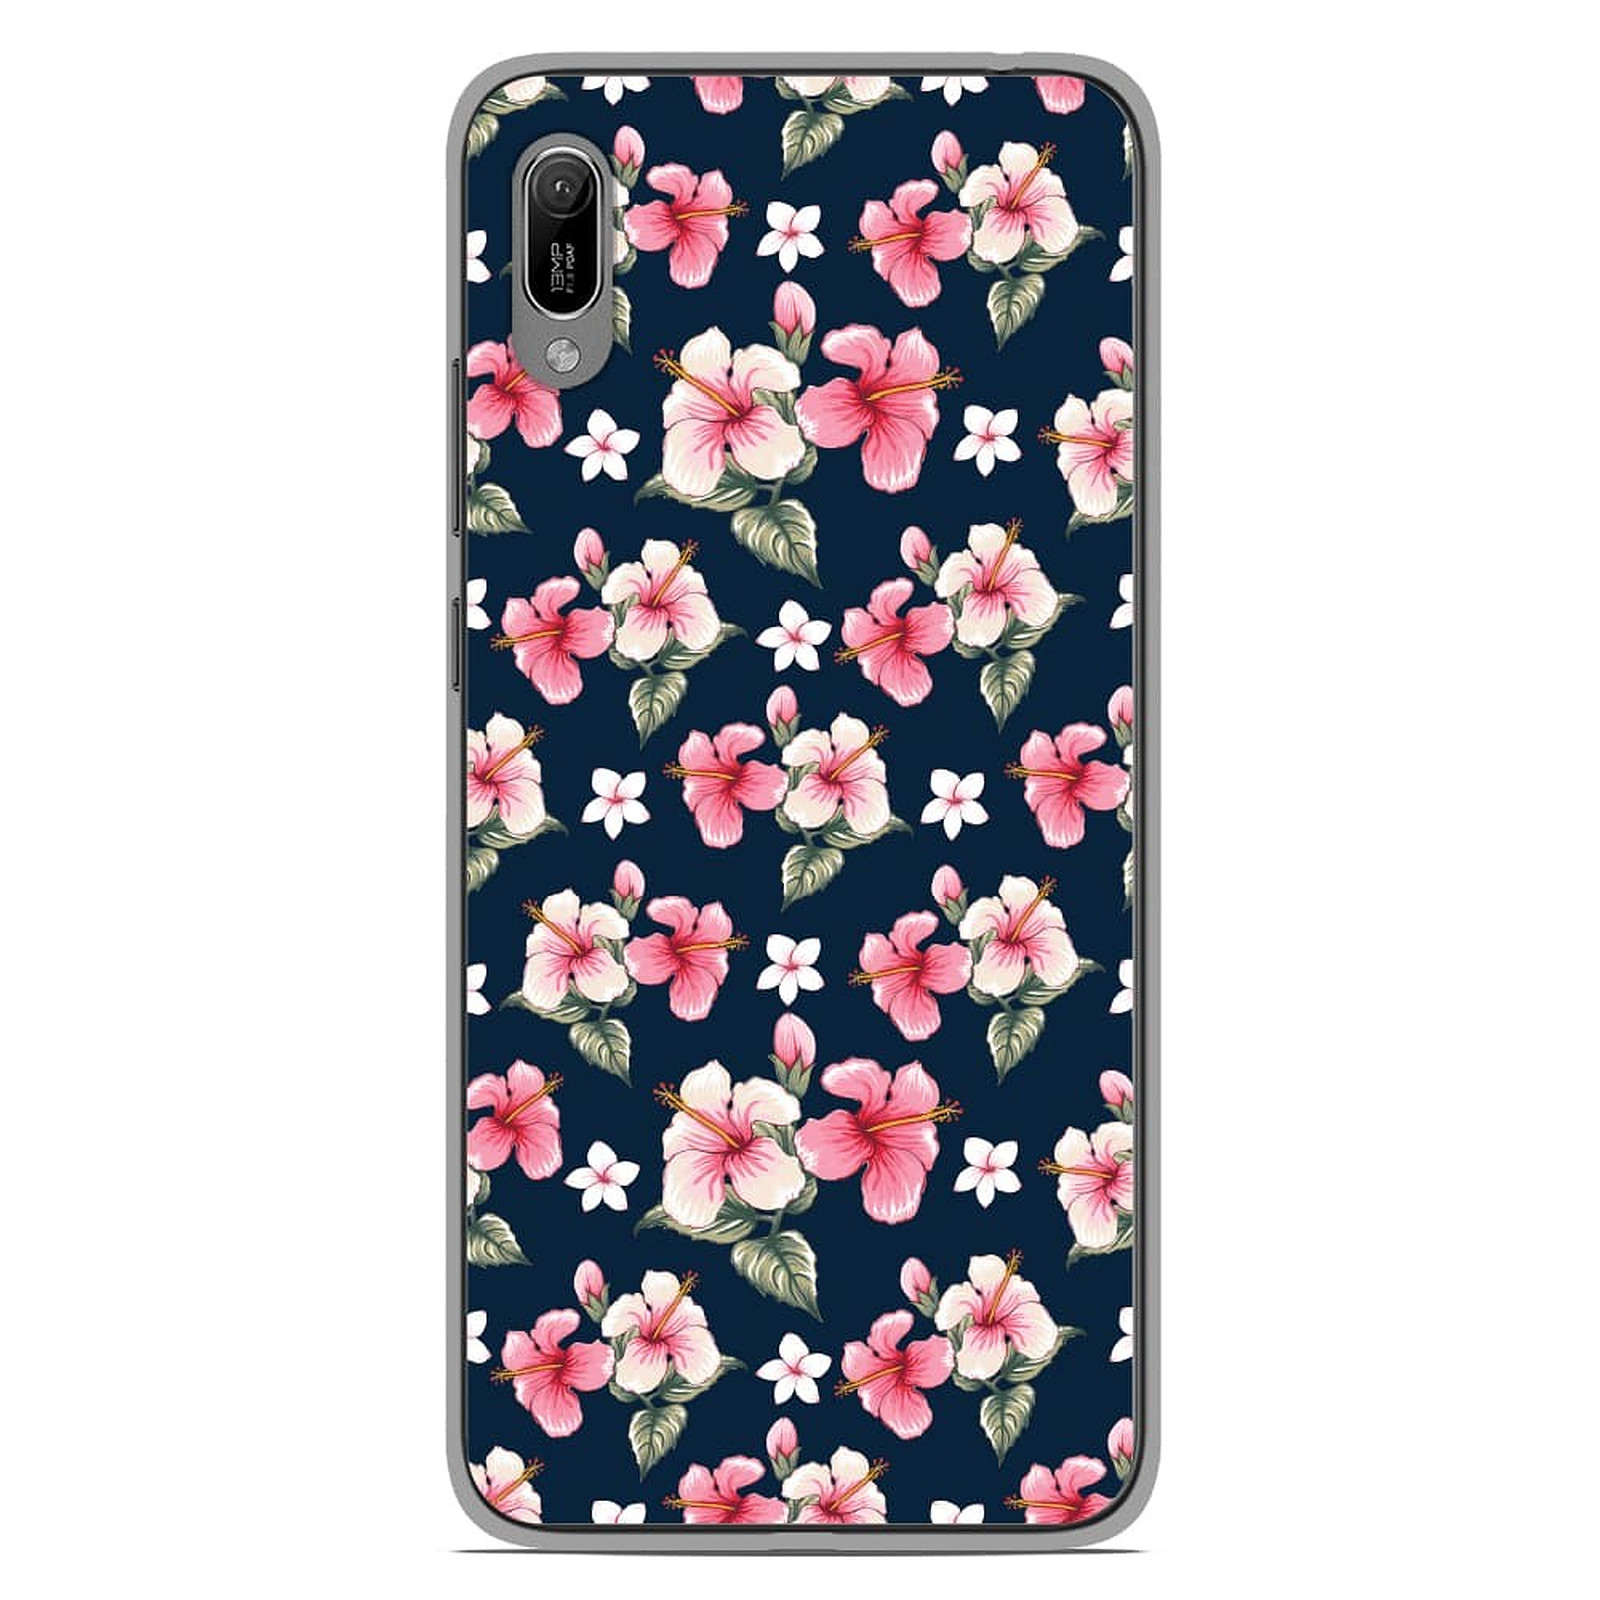 1001 Coques Coque silicone gel Huawei Y6 2019 motif Hibiscus Vintage - Coque telephone 1001Coques